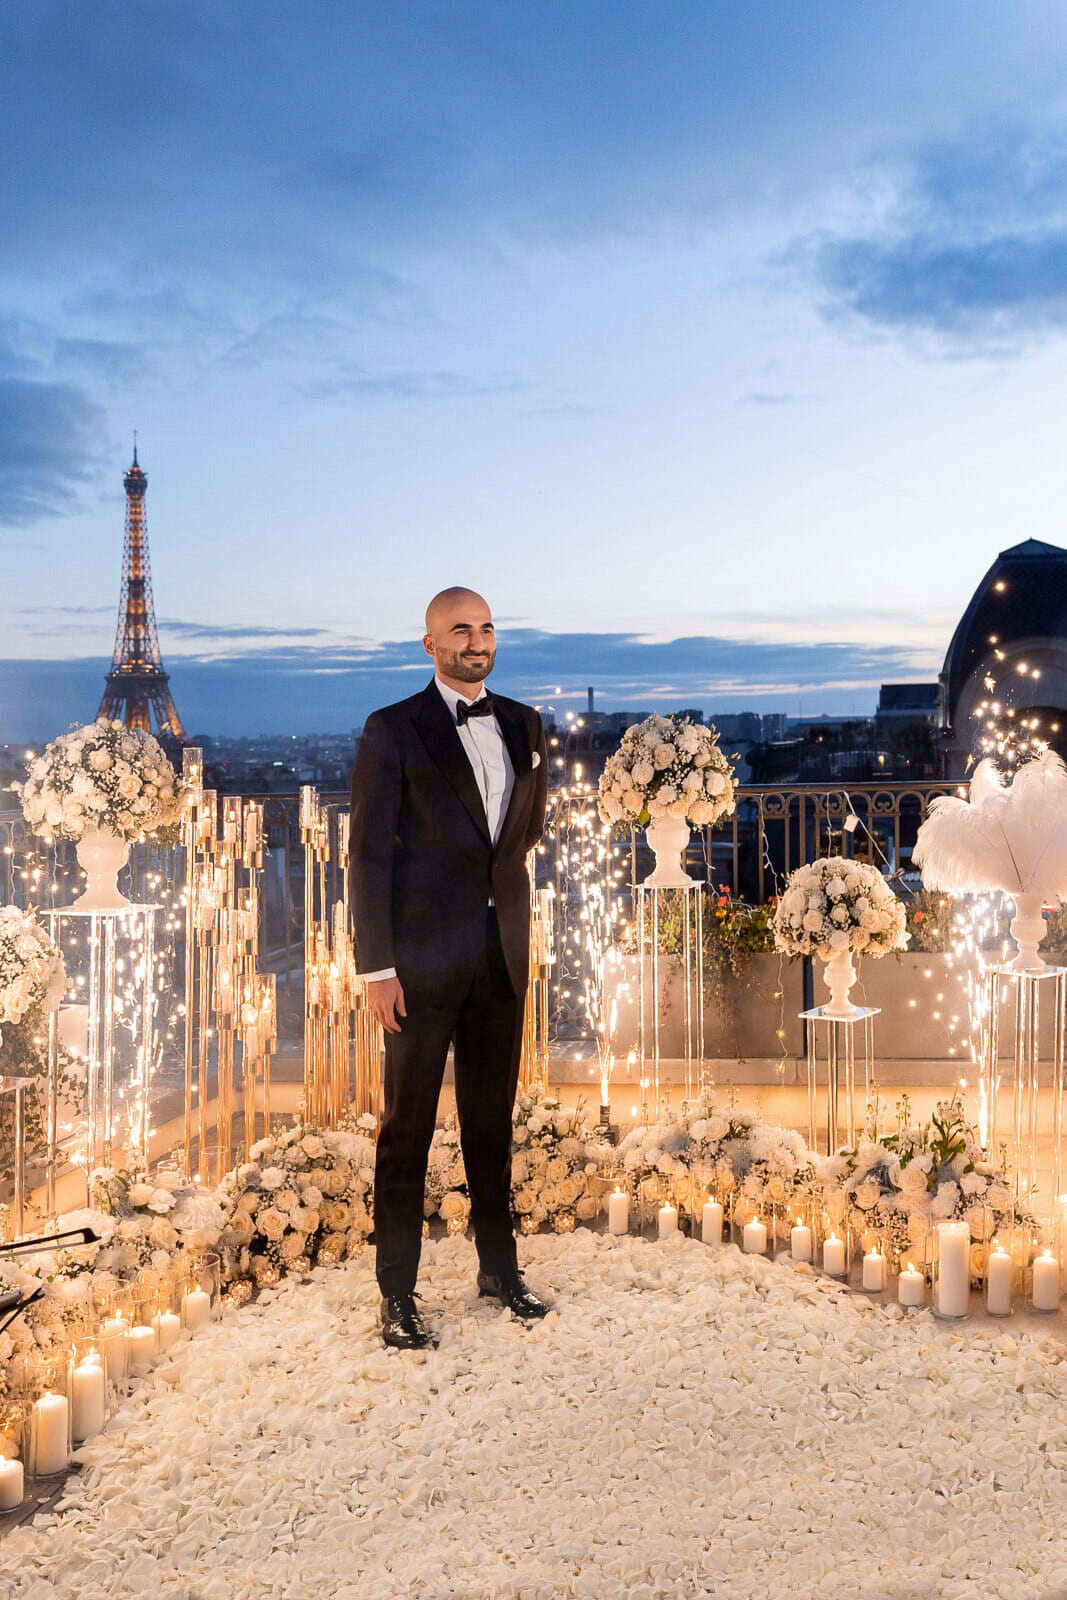 Epic Eiffel Tower Proposal with candles and white roses